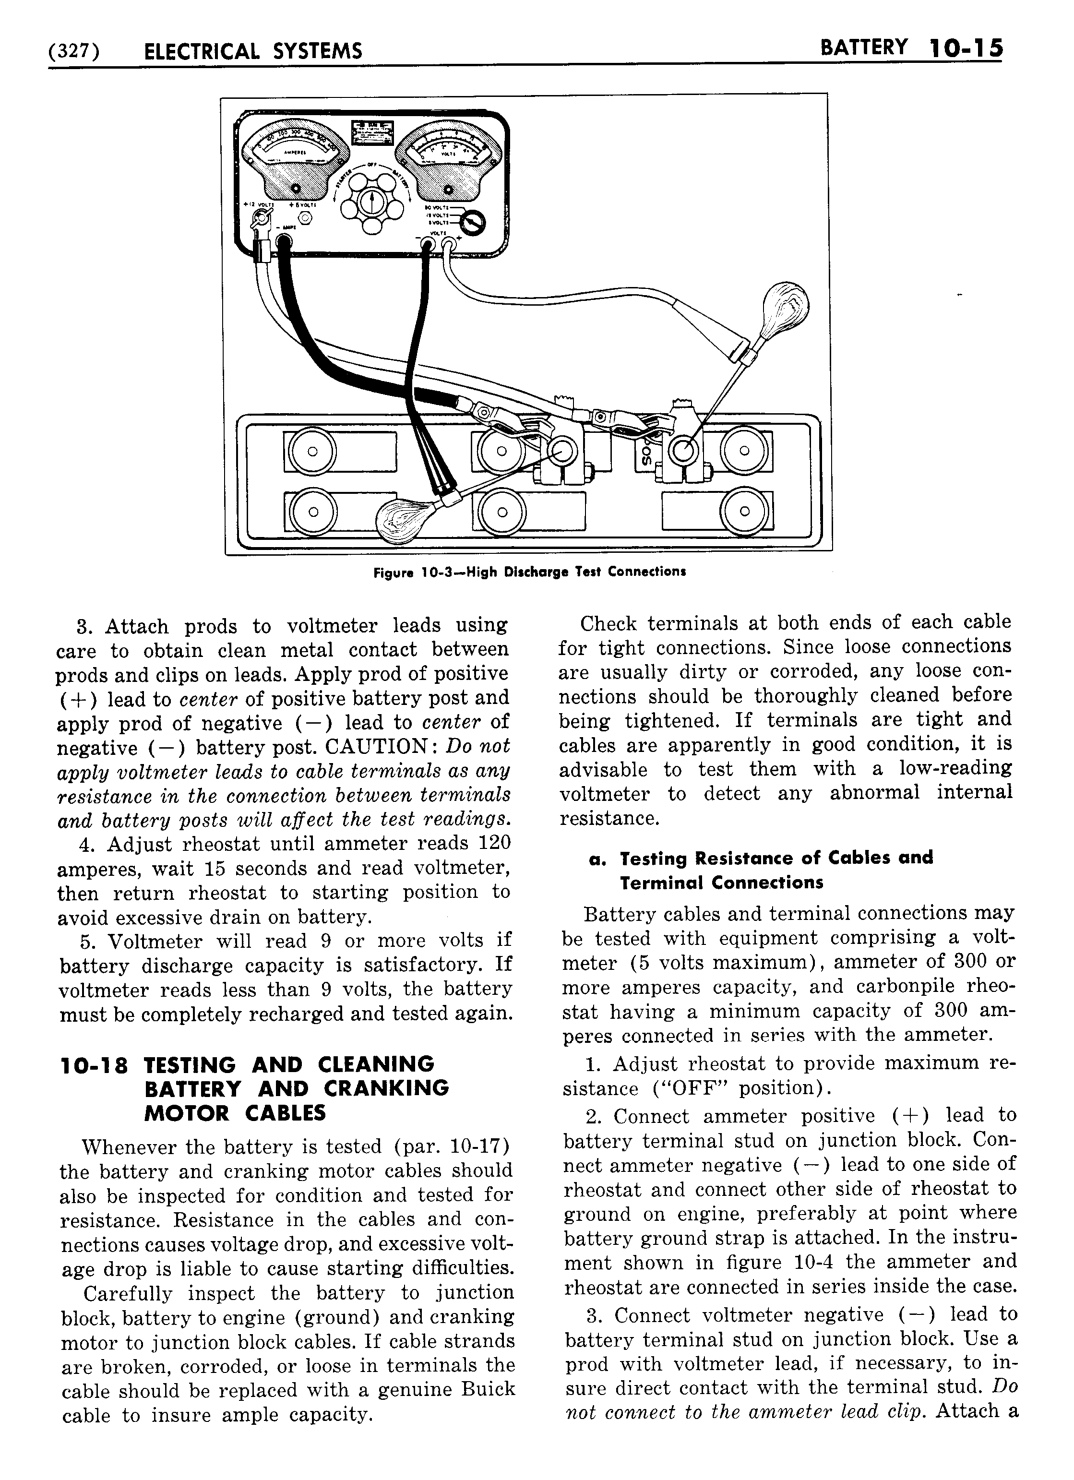 n_11 1954 Buick Shop Manual - Electrical Systems-015-015.jpg